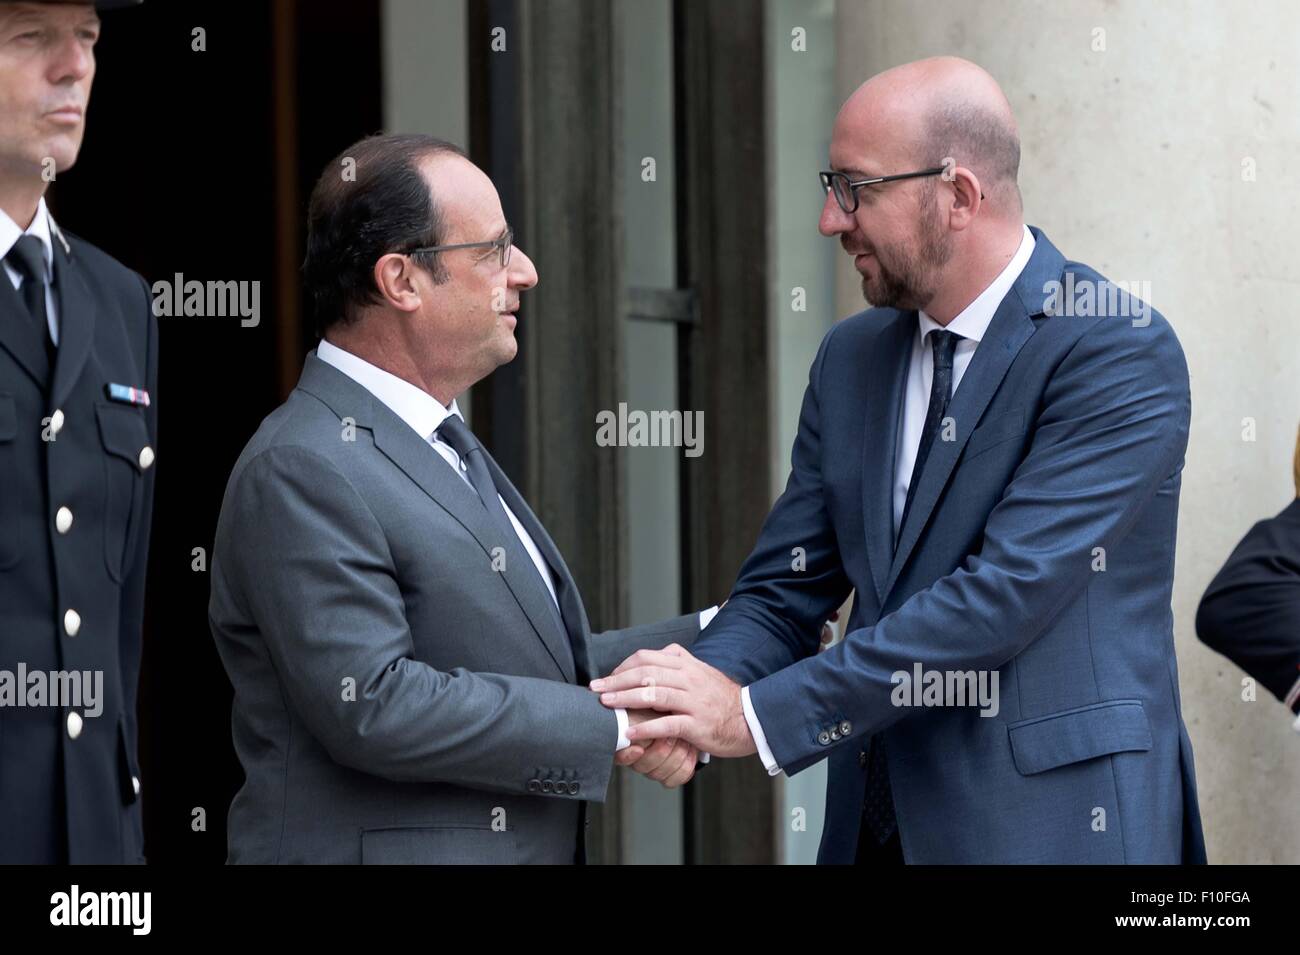 Paris, France. 24th Aug, 2015. French President Francois Hollande (L) welcomes Belgian Prime Minister Charles Michel upon his arrival at the Elysee Palace in Paris, France, Aug. 24, 2015. French President Francois Hollande on Monday awarded France's highest honor, the Legion d'honneur, to three U.S. men, Alek Skarlatos, Spencer Stone and Anthony Sadler and Briton Chris Norman who helped neutralize a shooter at Thalys high-speed train between Amsterdam and Paris last week. Credit:  Andy Louis/Xinhua/Alamy Live News Stock Photo